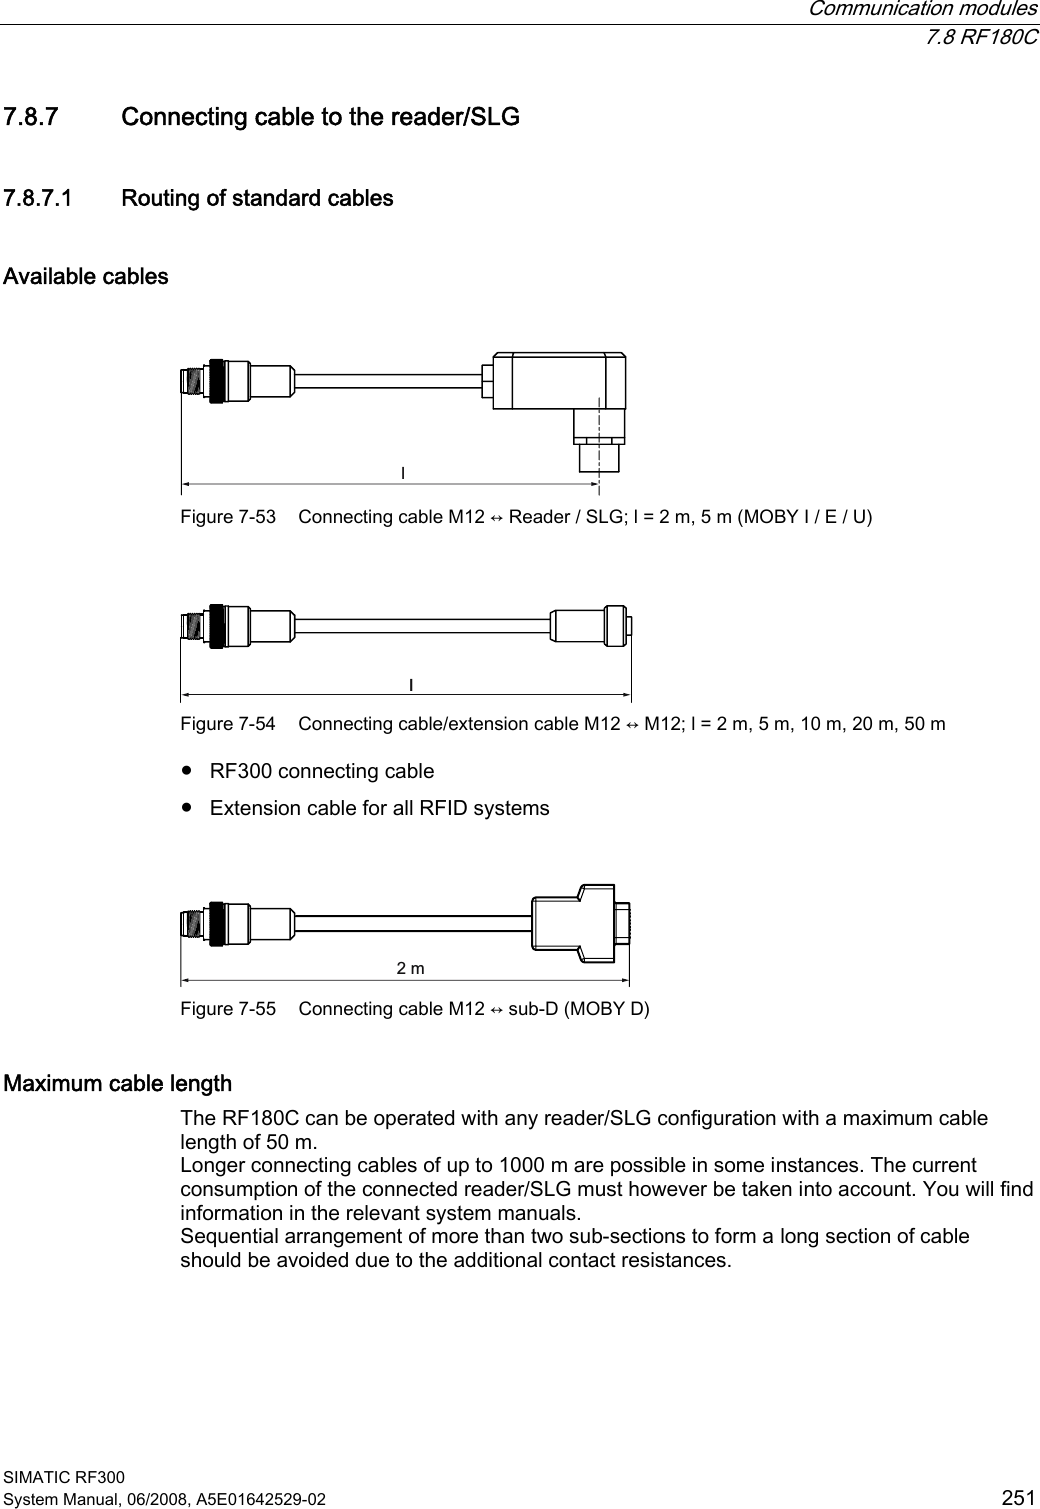  Communication modules  7.8 RF180C SIMATIC RF300 System Manual, 06/2008, A5E01642529-02  251 7.8.7 Connecting cable to the reader/SLG 7.8.7.1 Routing of standard cables Available cables  O Figure 7-53  Connecting cable M12 ↔ Reader / SLG; l = 2 m, 5 m (MOBY I / E / U)  O Figure 7-54  Connecting cable/extension cable M12 ↔ M12; l = 2 m, 5 m, 10 m, 20 m, 50 m ● RF300 connecting cable ● Extension cable for all RFID systems  P Figure 7-55  Connecting cable M12 ↔ sub-D (MOBY D) Maximum cable length The RF180C can be operated with any reader/SLG configuration with a maximum cable length of 50 m. Longer connecting cables of up to 1000 m are possible in some instances. The current consumption of the connected reader/SLG must however be taken into account. You will find information in the relevant system manuals. Sequential arrangement of more than two sub-sections to form a long section of cable should be avoided due to the additional contact resistances. 